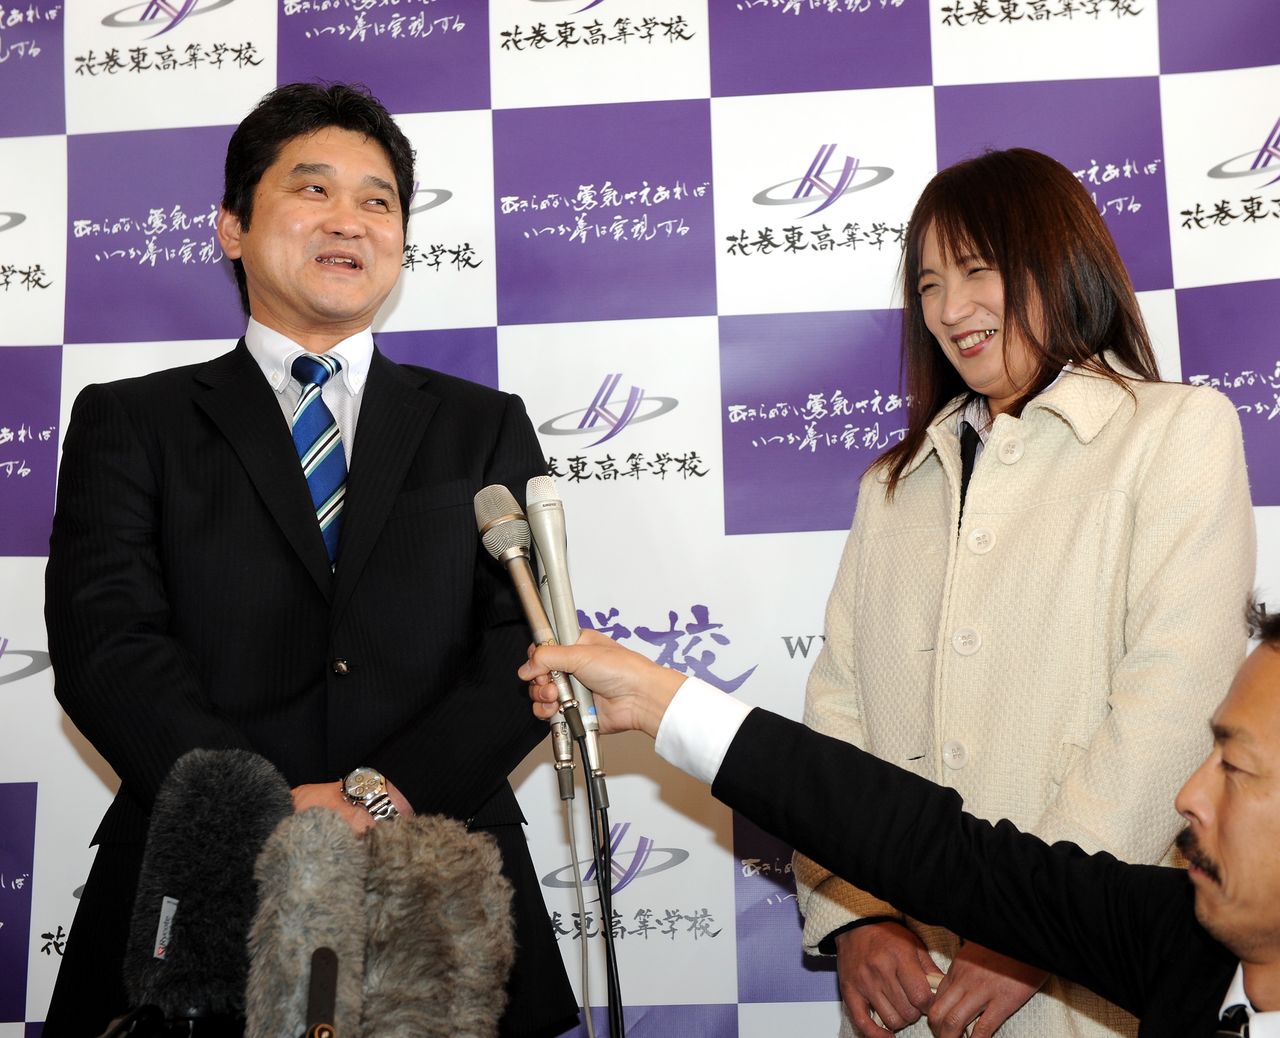 Ohtani’s father Tōru (left) and mother Kayoko talk to the press on March 2, 2013, after their son was drafted by the Nippon Ham Fighters of Japan’s professional baseball league. (© Nikkan Sports/Aflo)